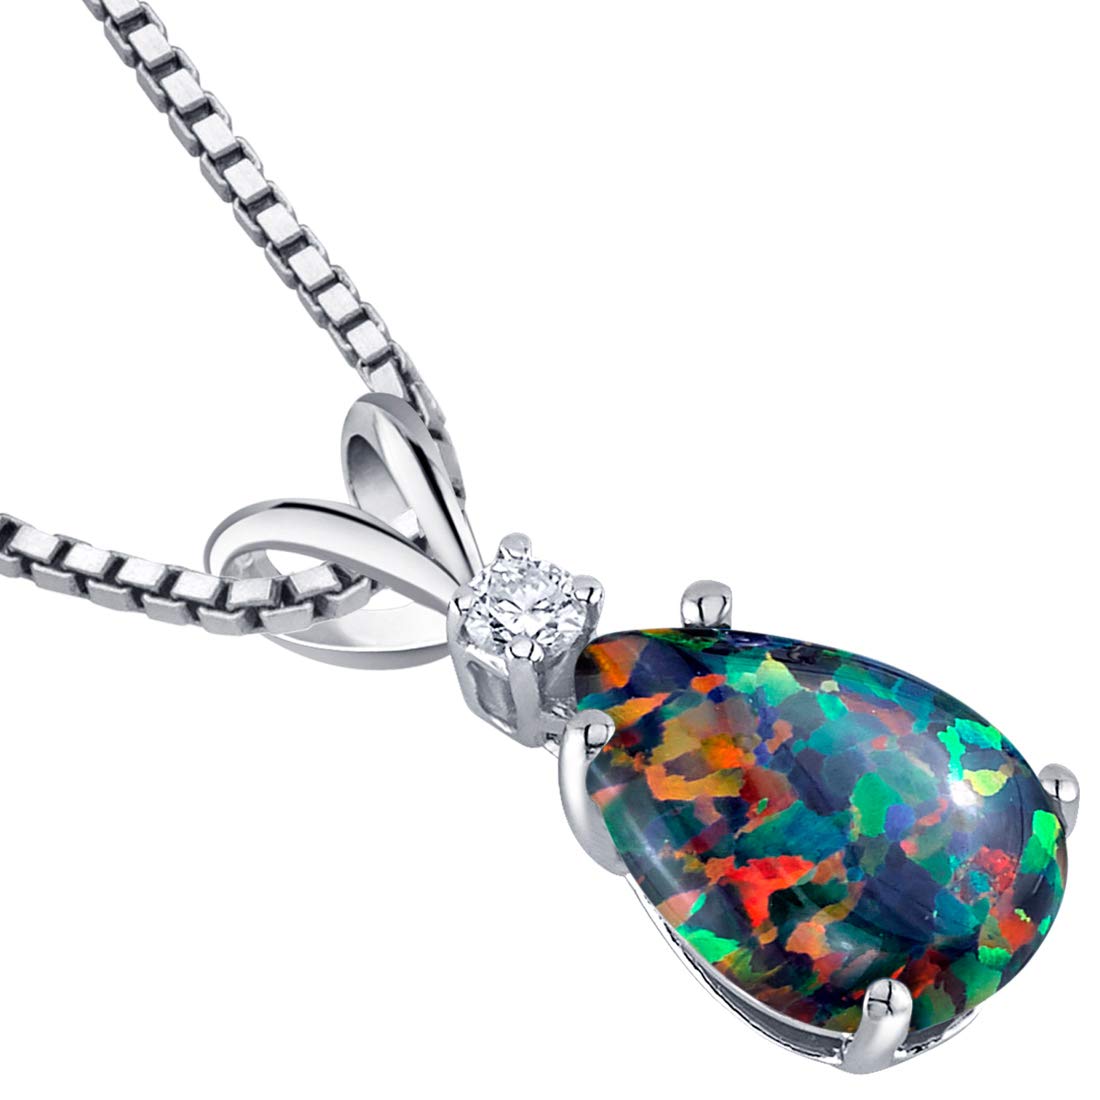 Peora Created Black Opal with Genuine Diamond Pendant for Women 14K White Gold, Elegant Teardrop Solitaire, Pear Shape, 10x7mm, 1 Carat total